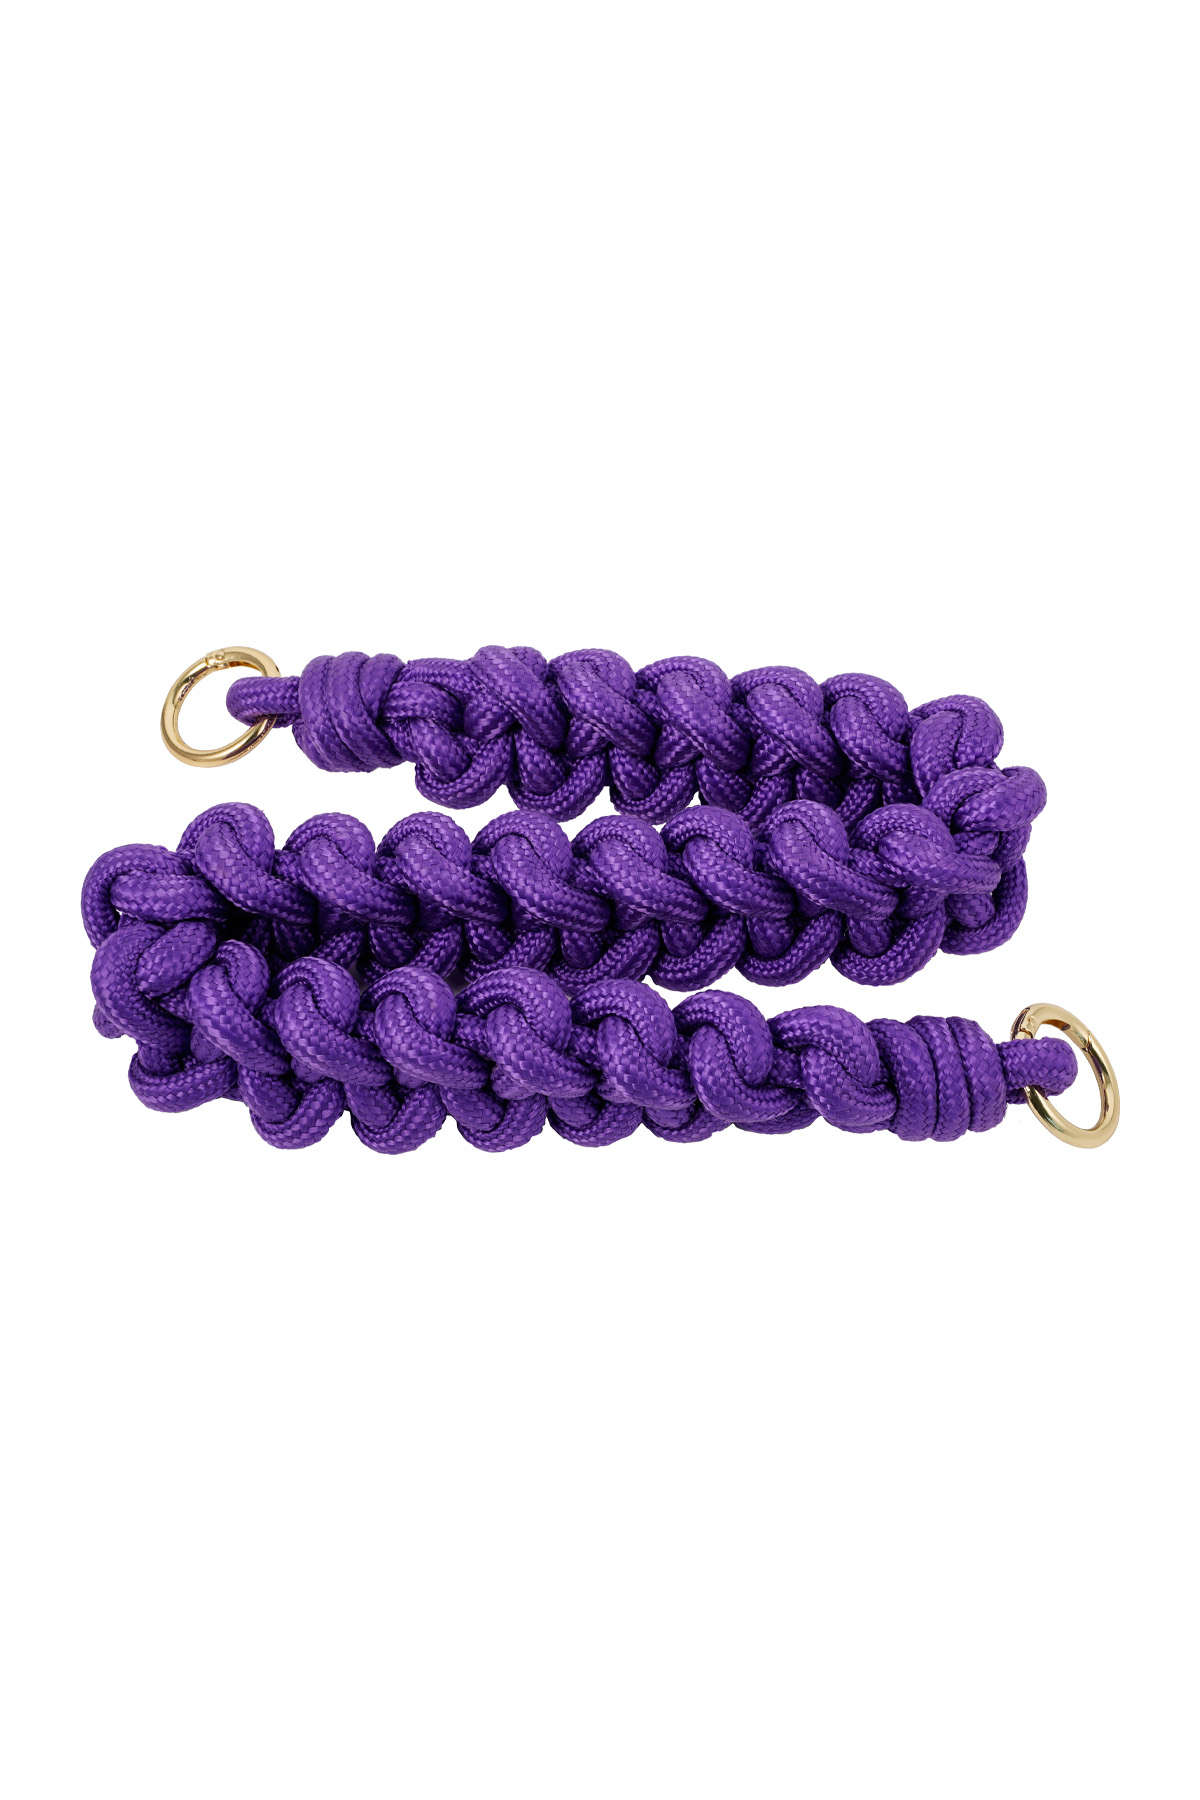 Braided bag strap purple h5 Picture5